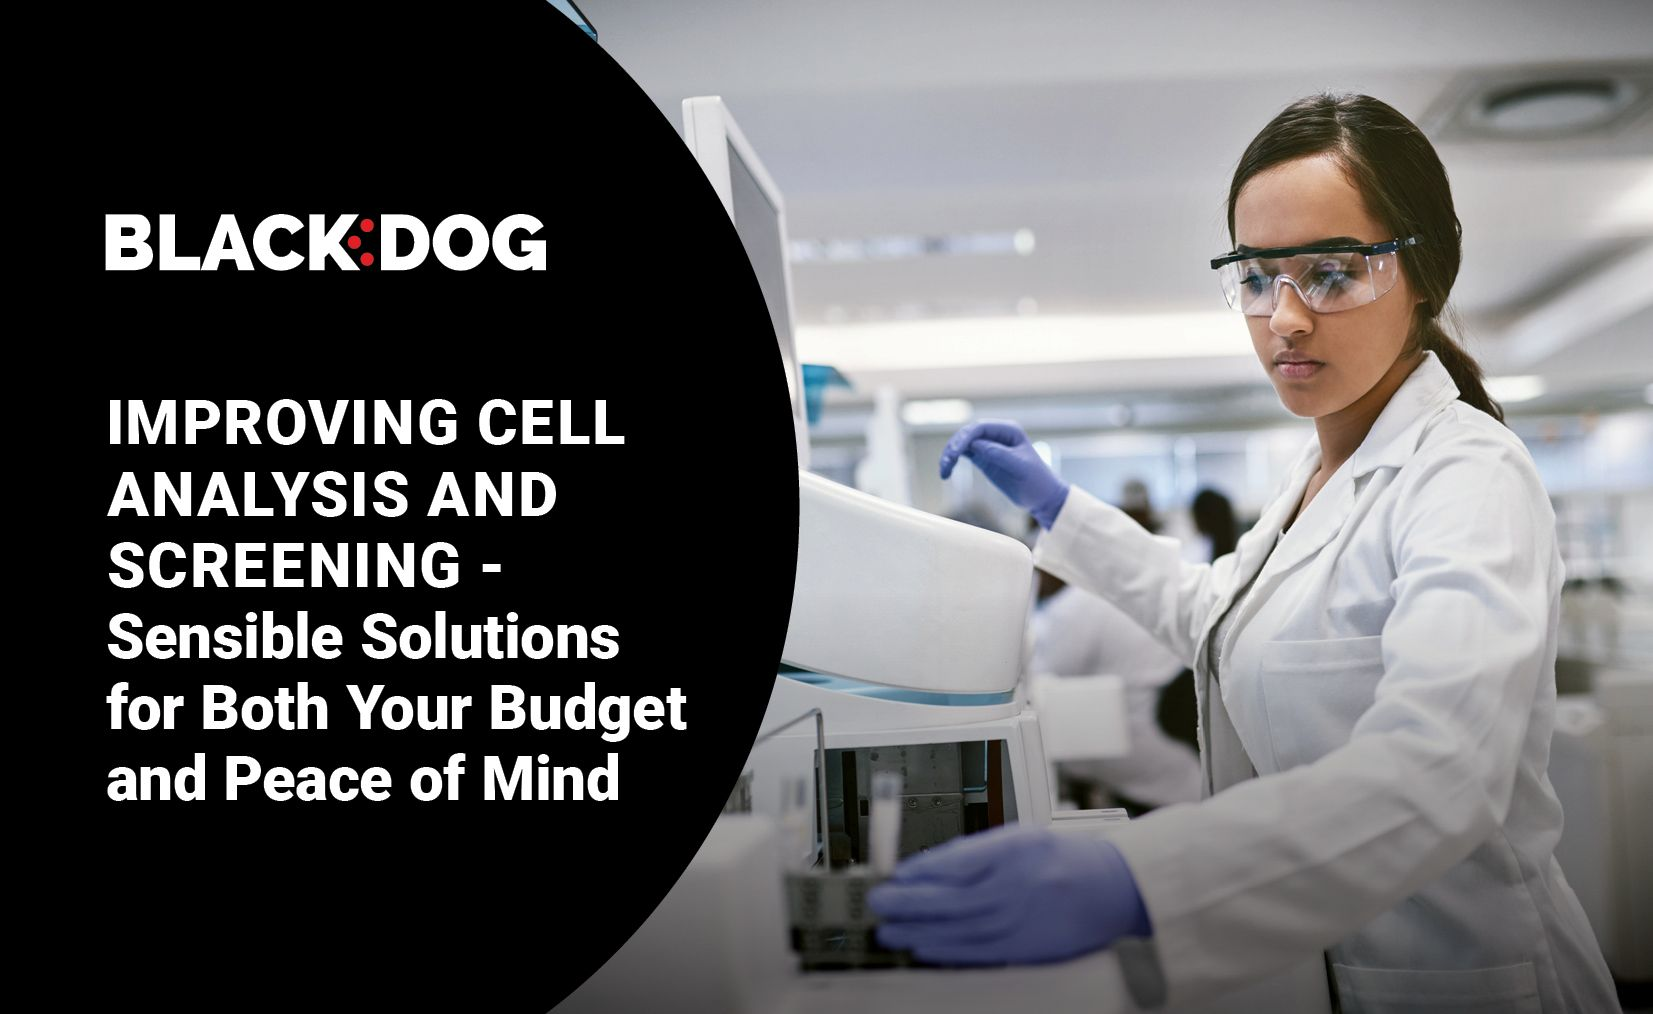 Performance is paramount when it comes to cell analysis and screening labs.